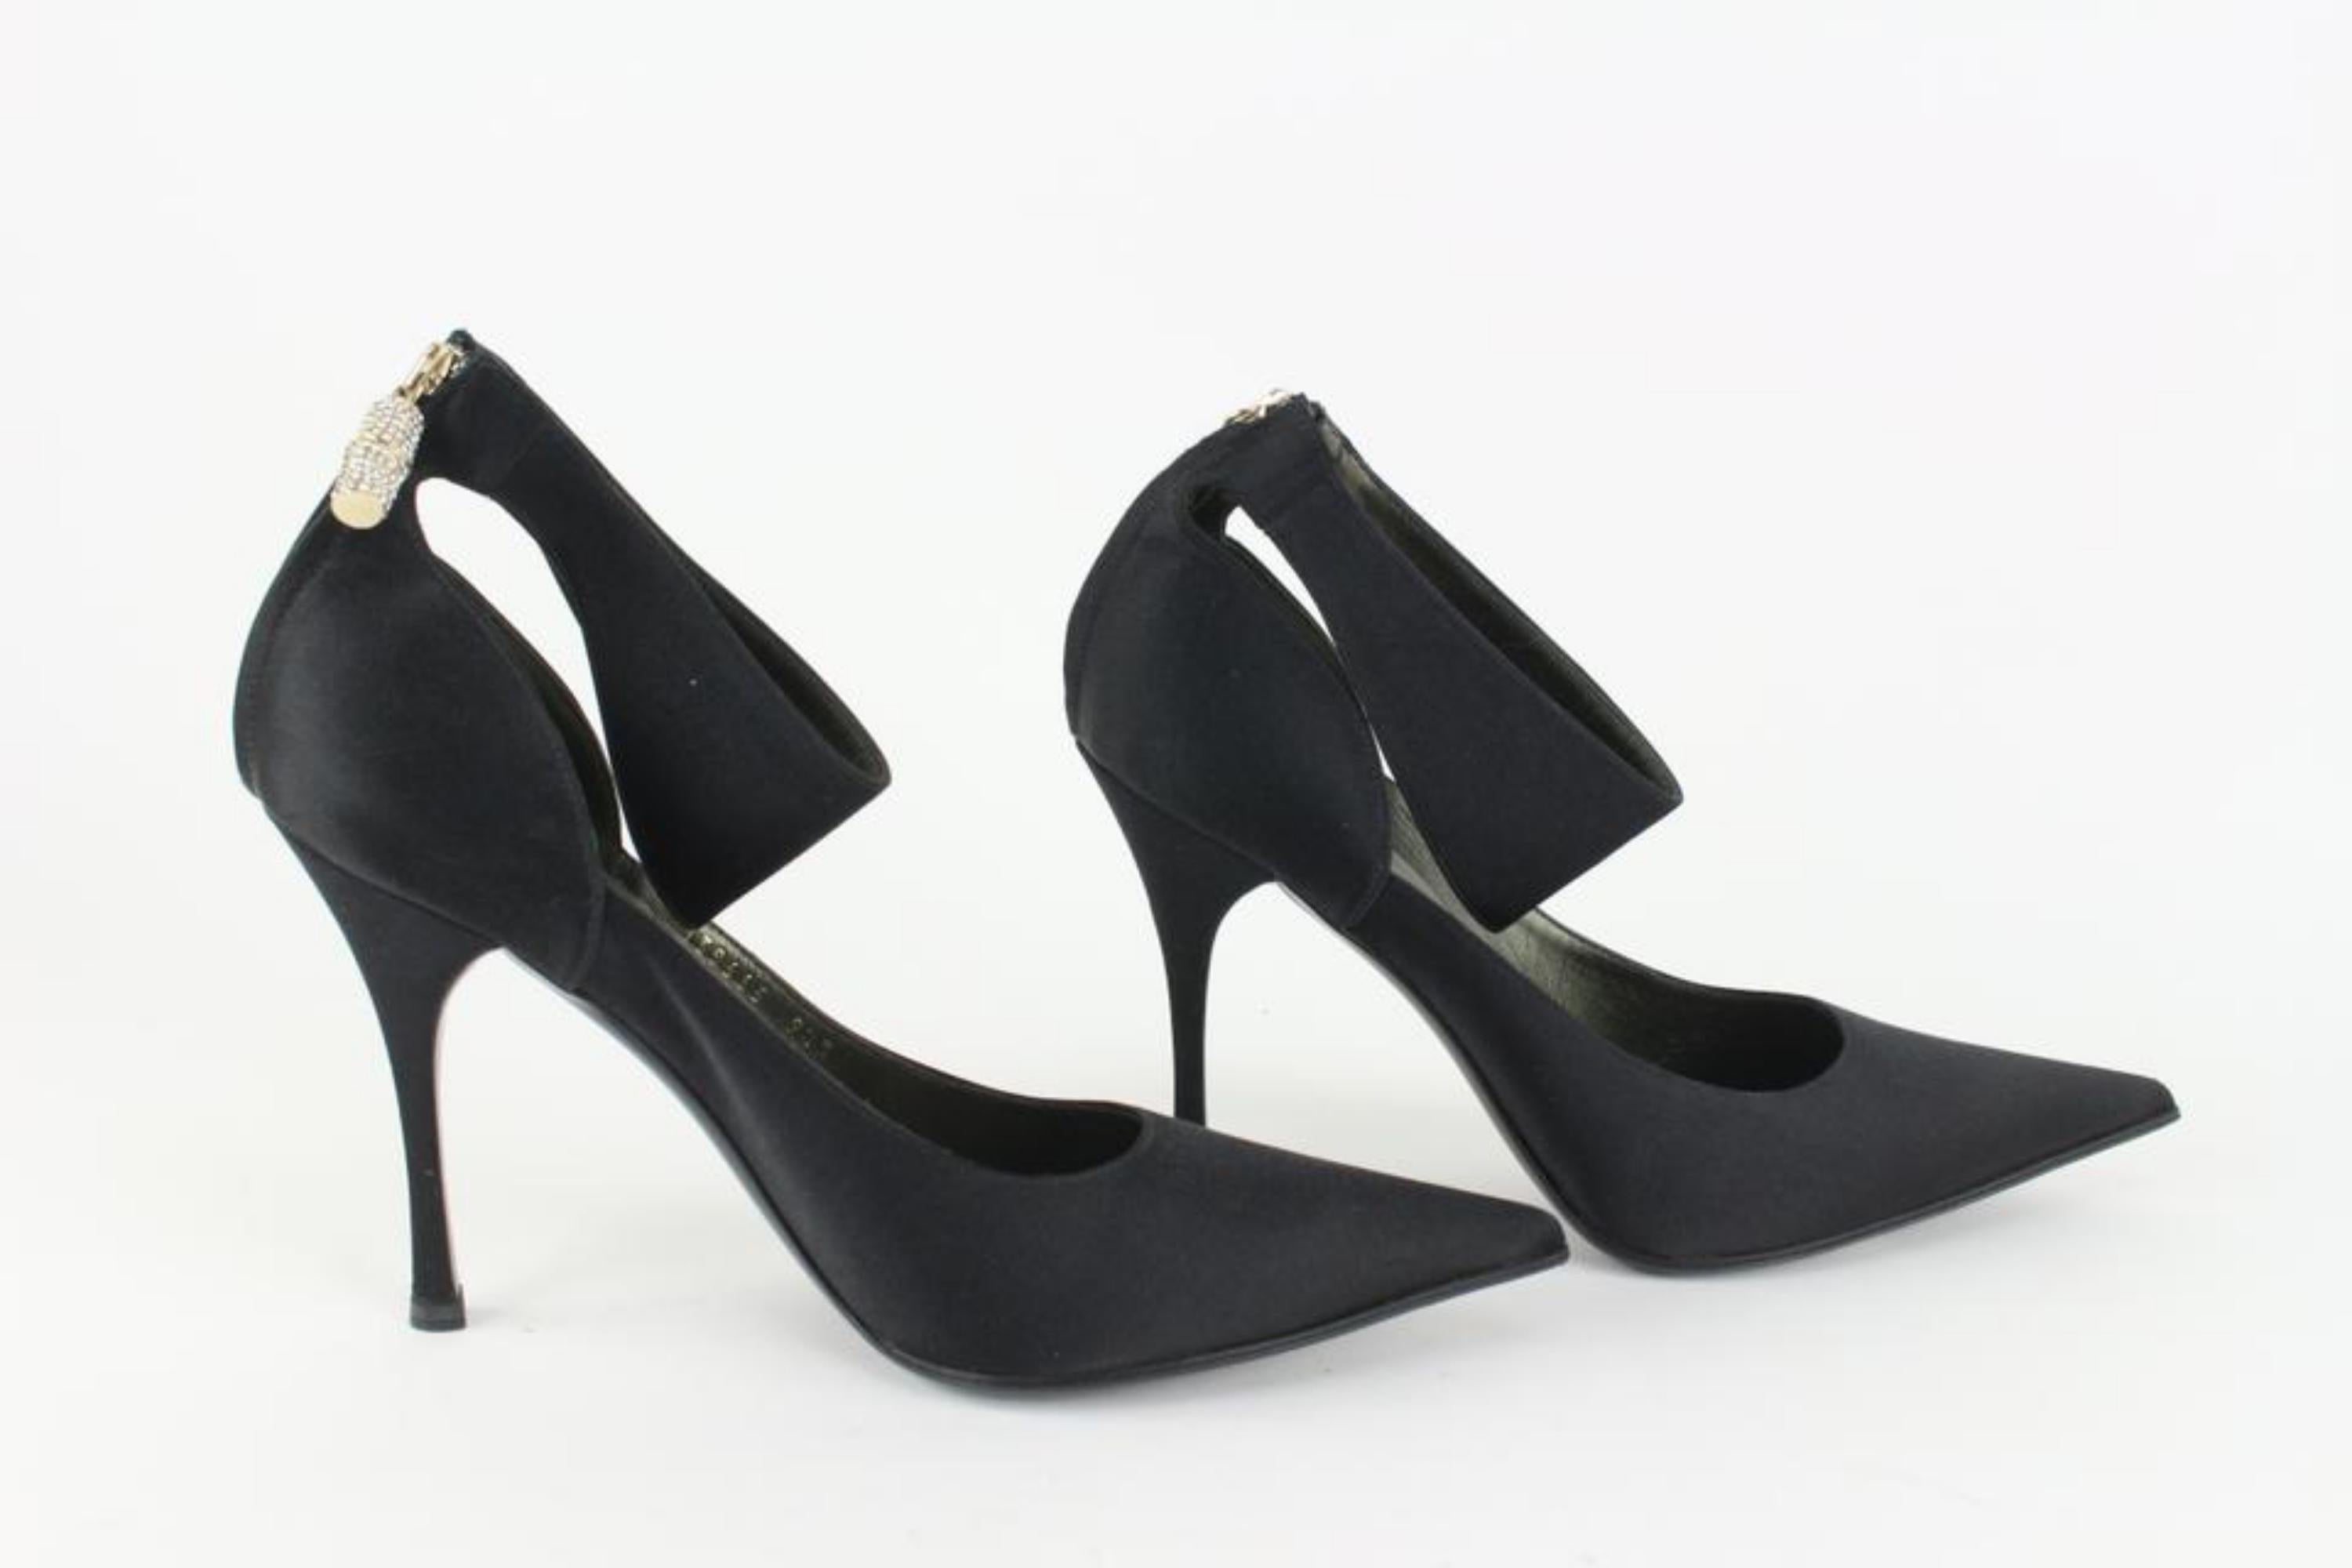 Gucci Women's 9.5 Black Satin Crystal Bamboo Heels 1210g33 In New Condition For Sale In Dix hills, NY